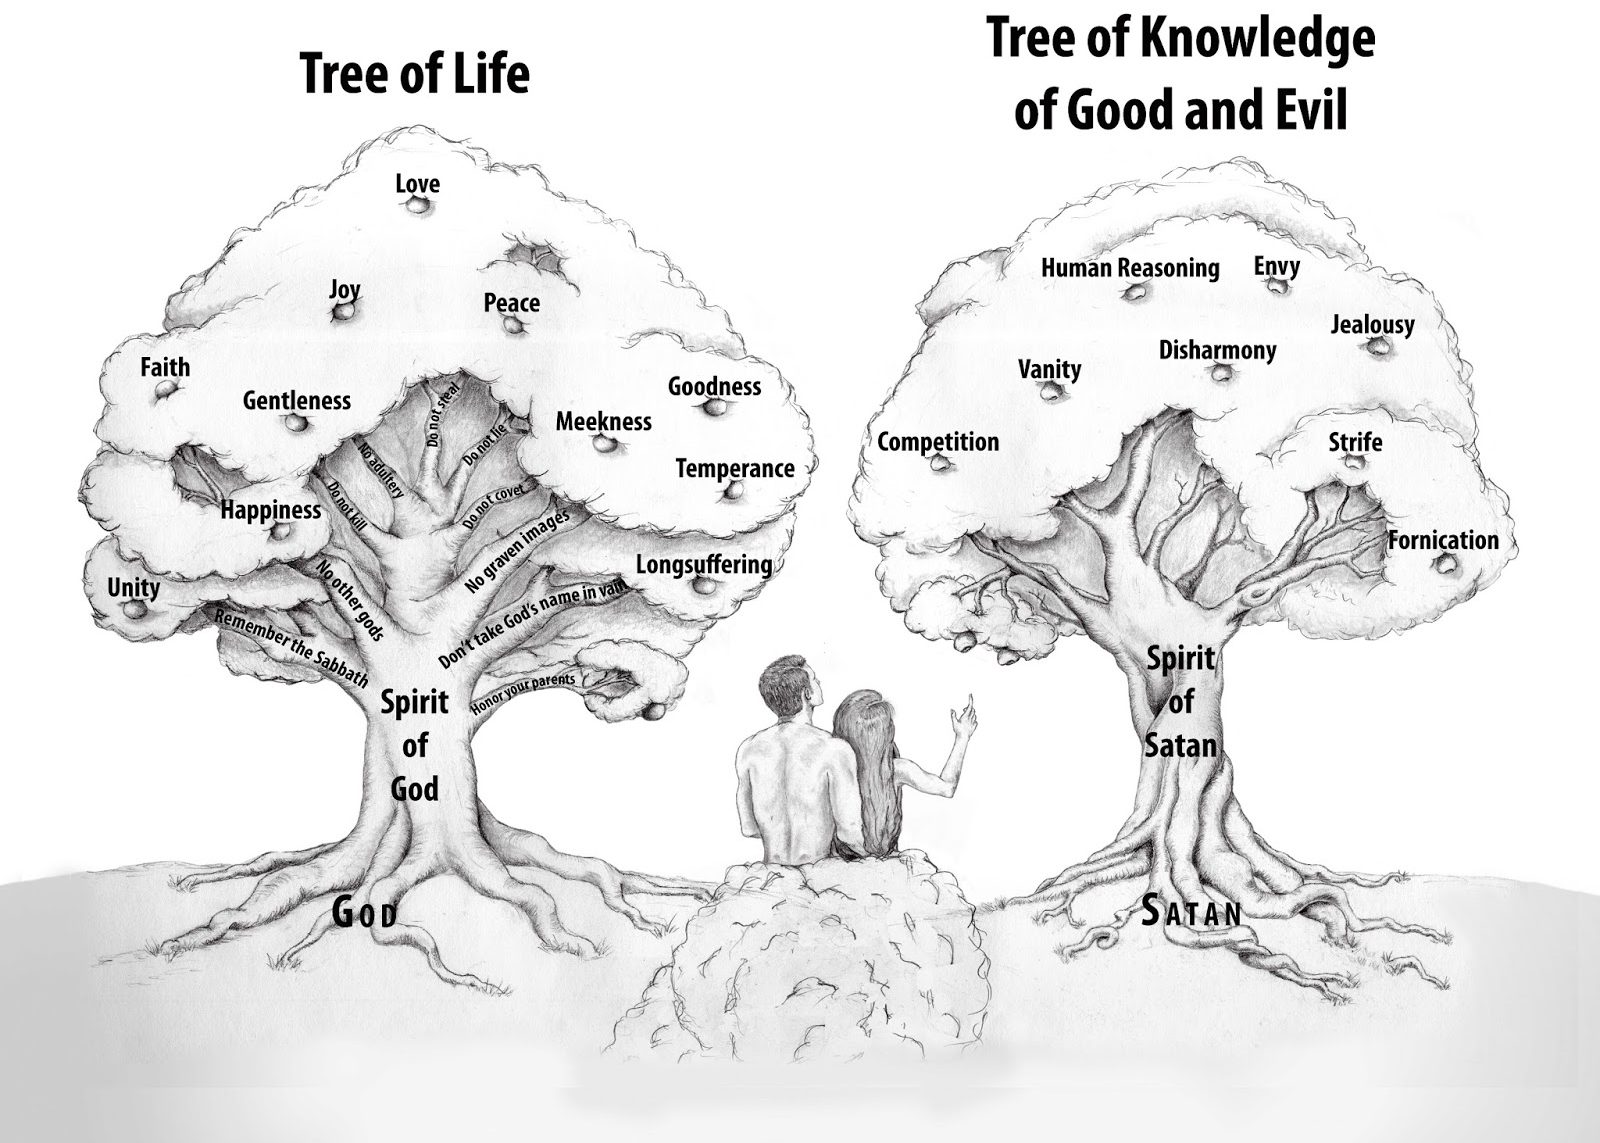 The Secret Meaning of the Tree of the Knowledge of Good and Evil